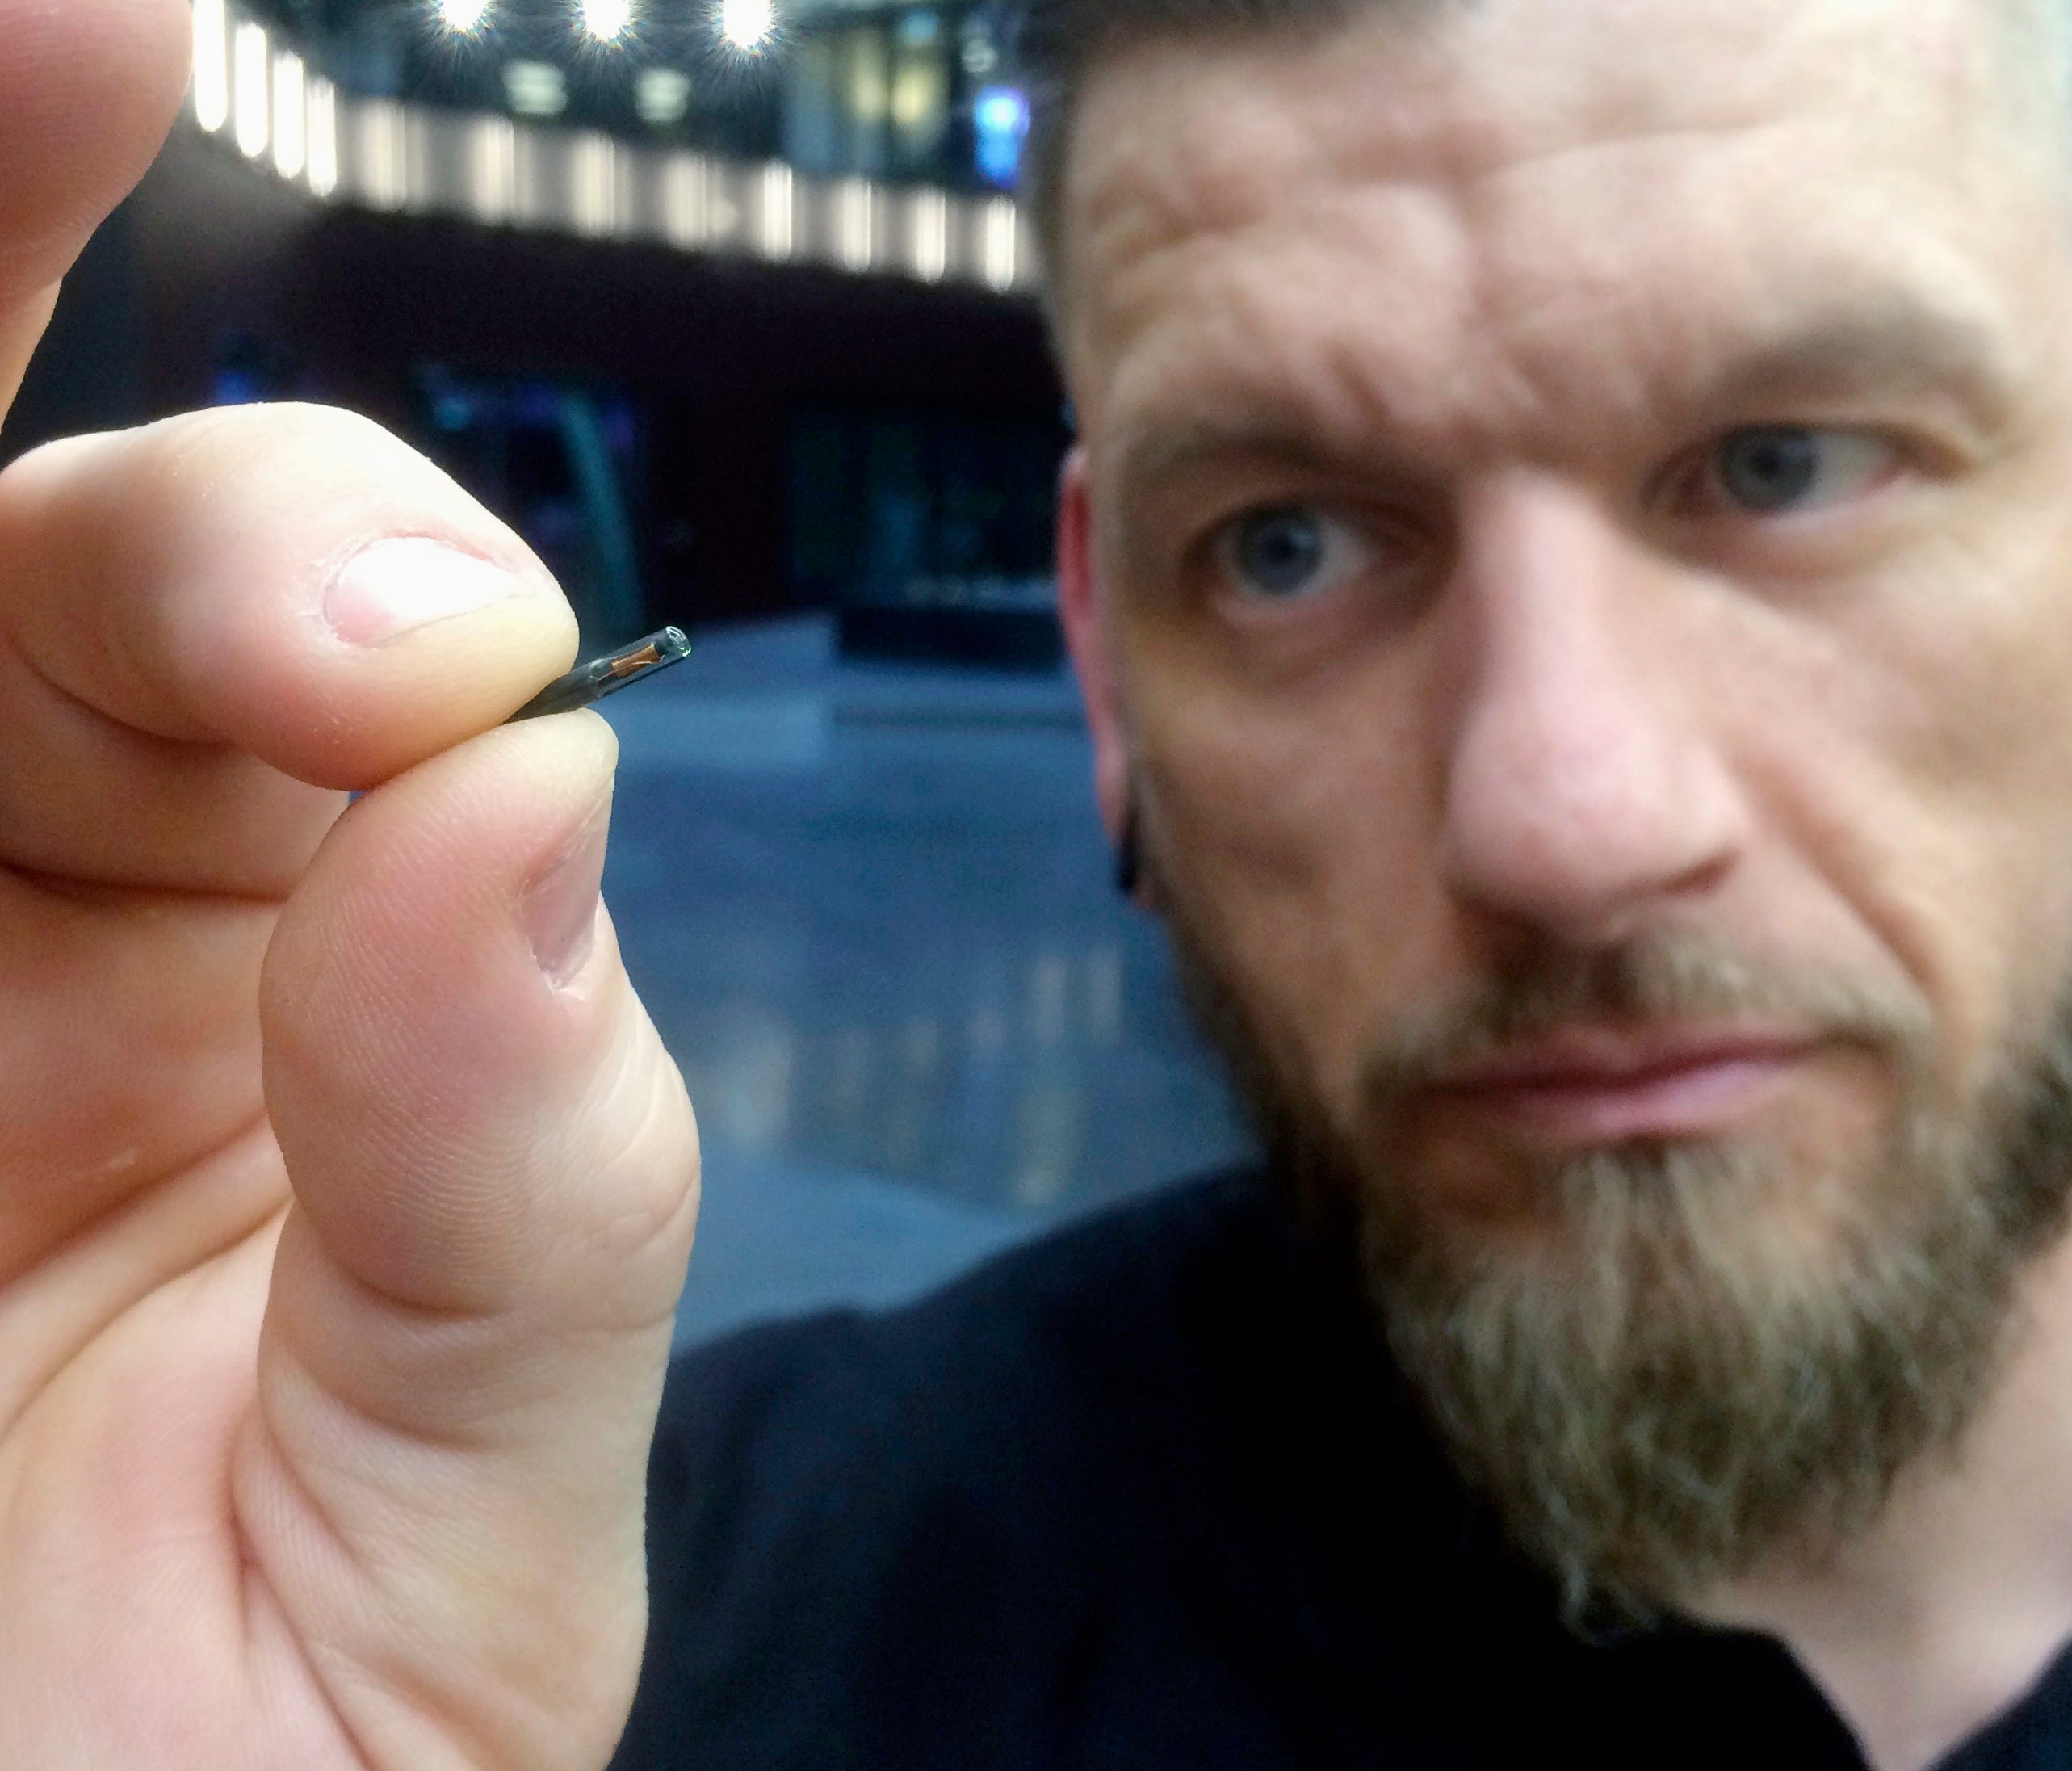 Jowan Osterlund from Biohax Sweden, holds a small microchip implant, similar to those implanted into workers at the Epicenter digital innovation business center